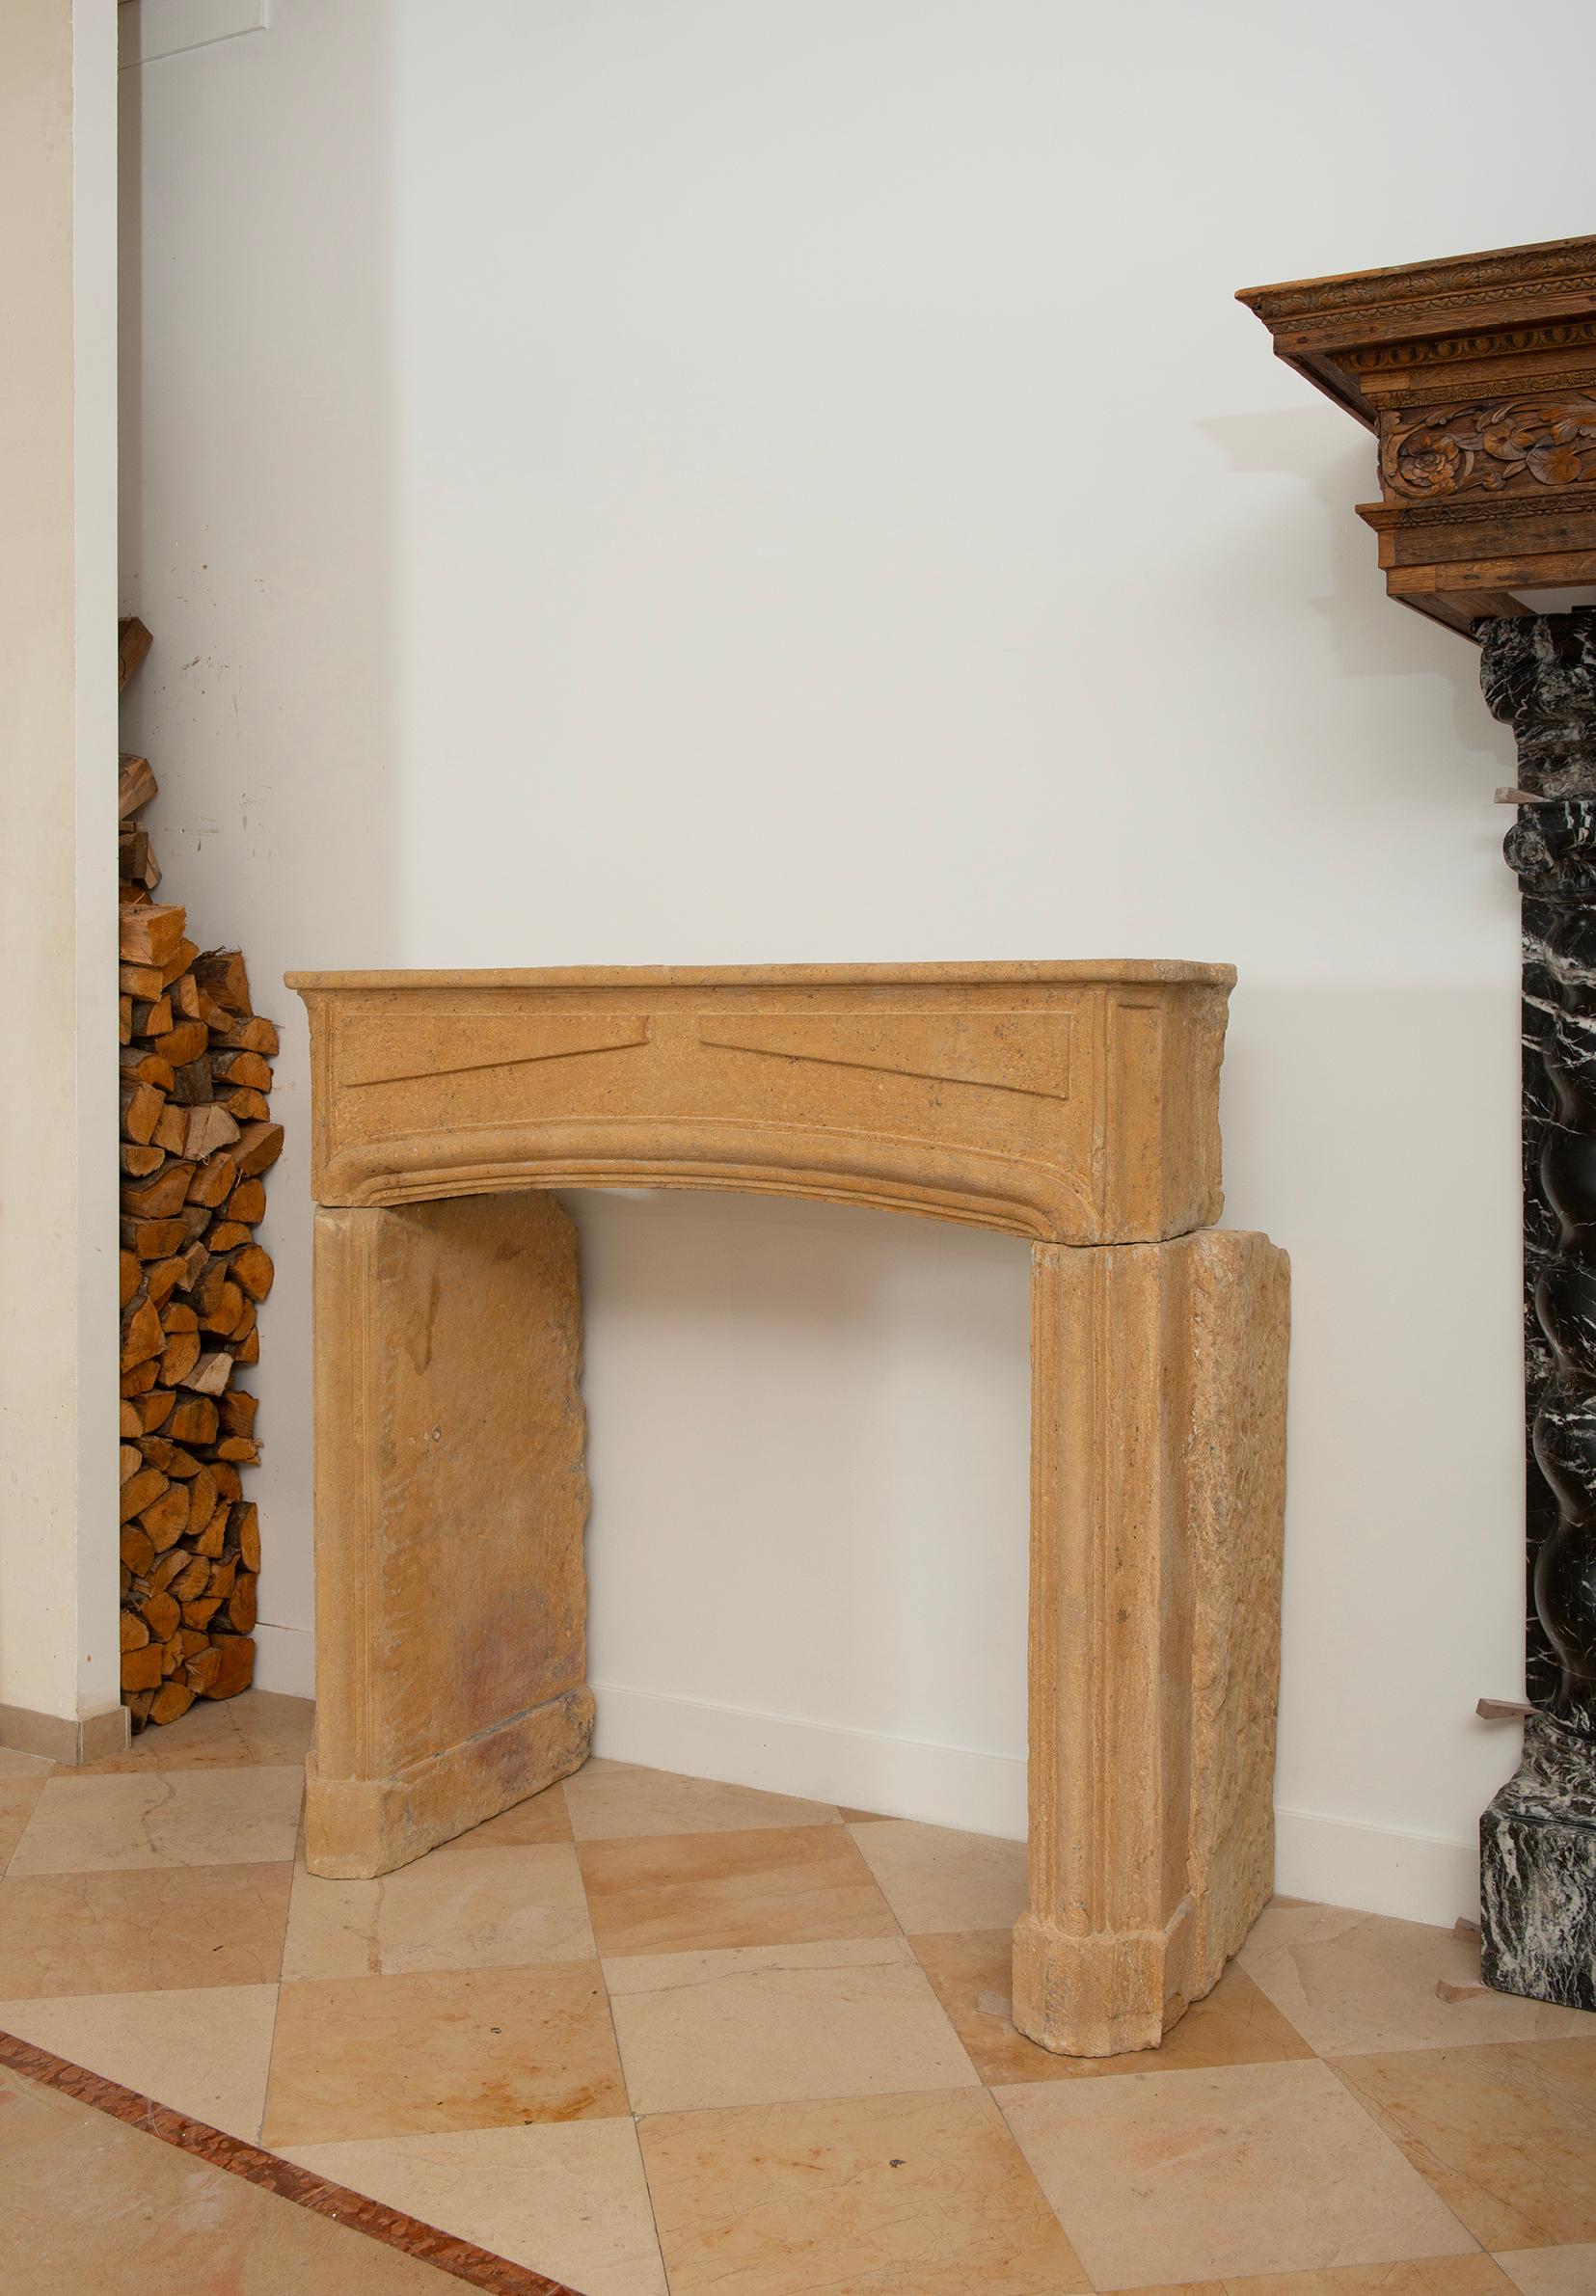 Rustic Limestone Louis XIV Fireplace Mantel In Fair Condition For Sale In Haarlem, Noord-Holland